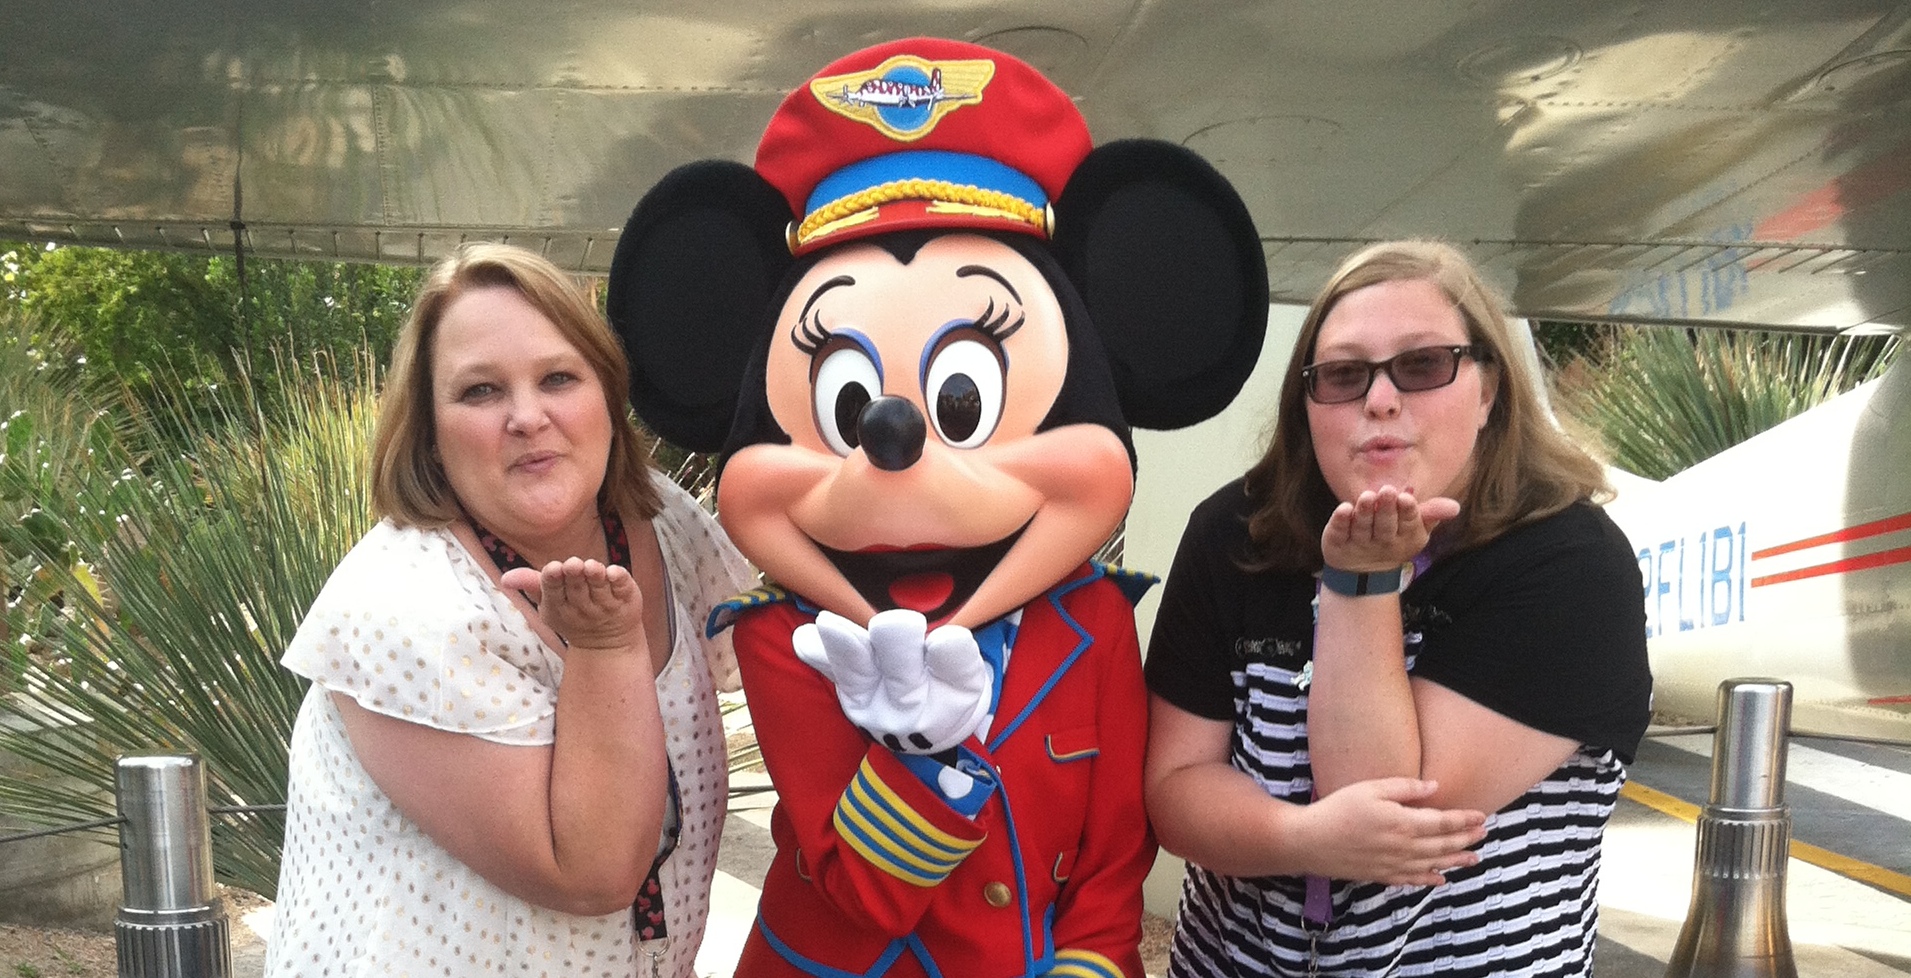 Very Good Advice Blog Hop #2: Going on a (Play) Date at a Disney Park